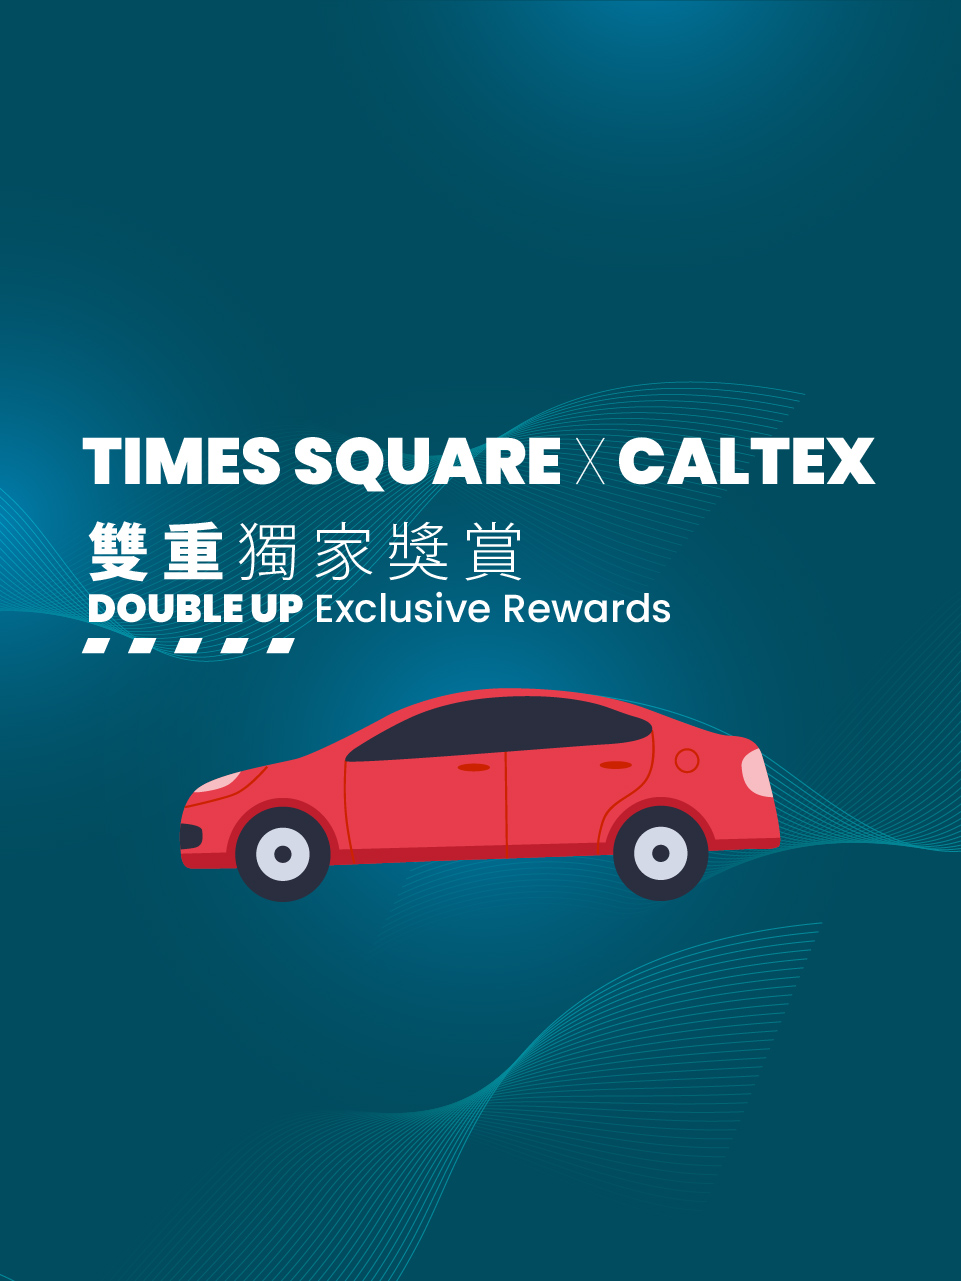 Times Square x Caltex DOUBLE UP Exclusive Rewards